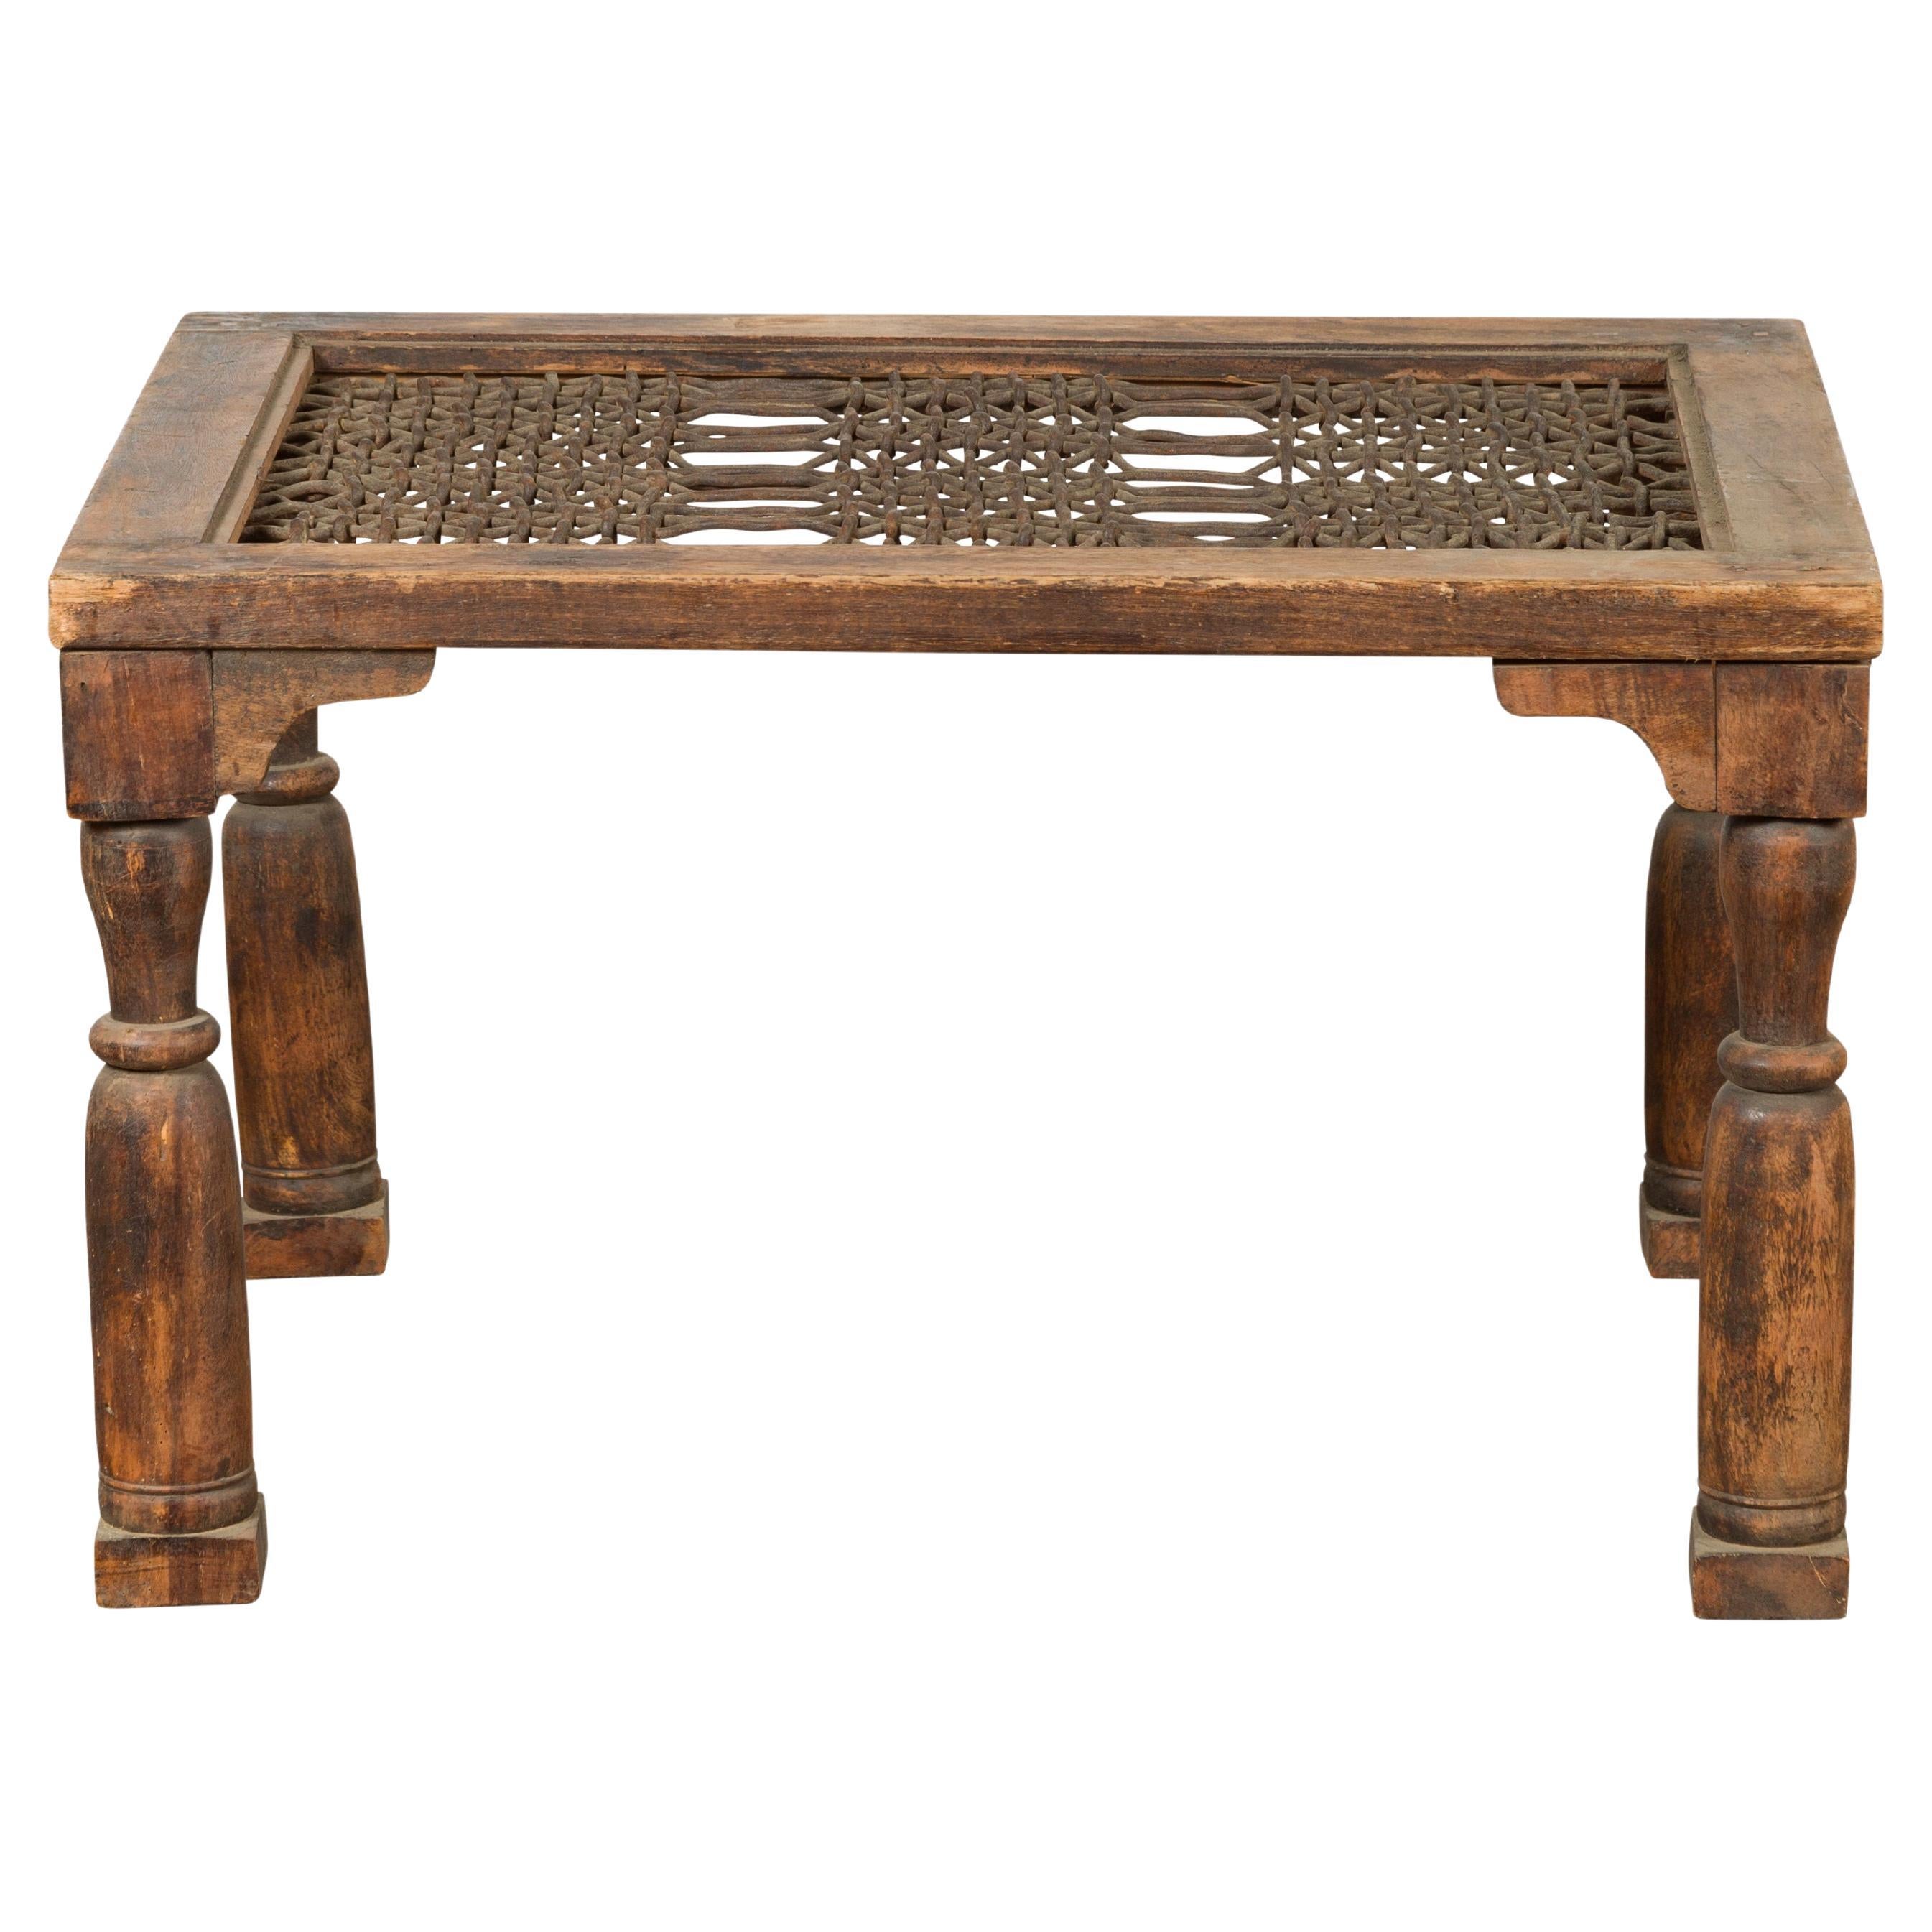 Indian Antique Window Grate Made into a Coffee Table with Turned Baluster Legs